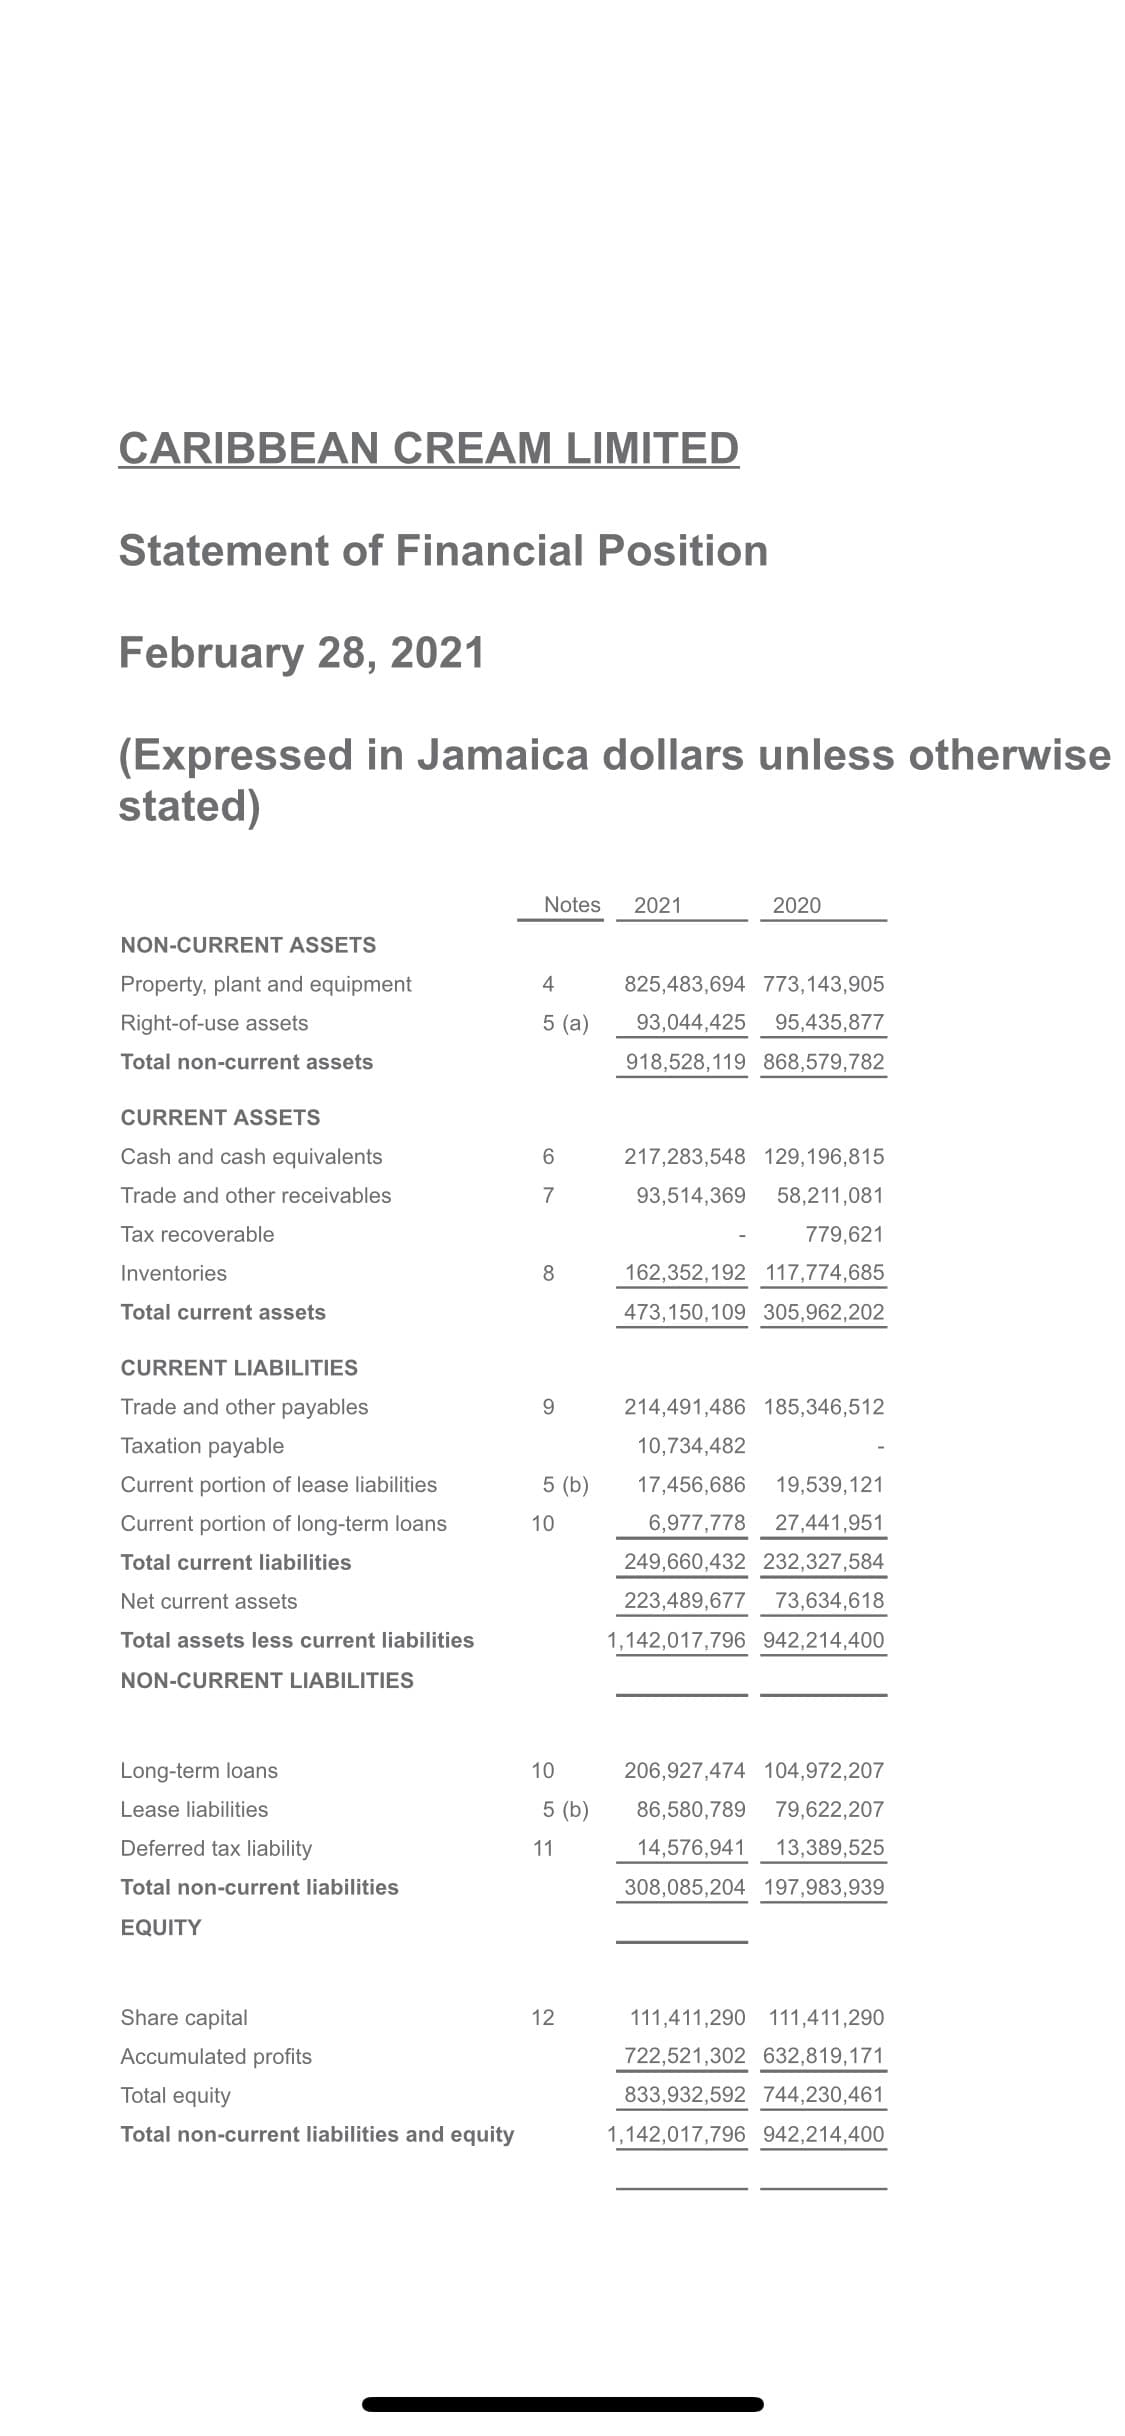 CARIBBEAN CREAM LIMITED
Statement of Financial Position
February 28, 2021
(Expressed in Jamaica dollars unless otherwise
stated)
Notes
2021
2020
NON-CURRENT ASSETS
Property, plant and equipment
4
825,483,694 773,143,905
Right-of-use assets
5 (a)
93,044,425
95,435,877
Total non-current assets
918,528,119 868,579,782
CURRENT ASSETS
Cash and cash equivalents
6
217,283,548 129,196,815
Trade and other receivables
7
93,514,369
58,211,081
Tax recoverable
779,621
Inventories
162,352,192 117,774,685
Total current assets
473,150,109 305,962,202
CURRENT LIABILITIES
Trade and other payables
214,491,486 185,346,512
Taxation payable
10,734,482
Current portion of lease liabilities
5 (b)
17,456,686
19,539,121
Current portion of long-term loans
10
6,977,778
27,441,951
Total current liabilities
249,660,432 232,327,584
Net current assets
223,489,677
73,634,618
Total assets less current liabilities
1,142,017,796 942,214,400
NON-CURRENT LIABILITIES
Long-term loans
10
206,927,474 104,972,207
Lease liabilities
5 (b)
86,580,789
79,622,207
Deferred tax liability
11
14,576,941
13,389,525
Total non-current liabilities
308,085,204 197,983,939
EQUITY
Share capital
12
111,411,290 111,411,290
Accumulated profits
722,521,302 632,819,171
Total equity
833,932,592 744,230,461
Total non-current liabilities and equity
1,142,017,796 942,214,400
